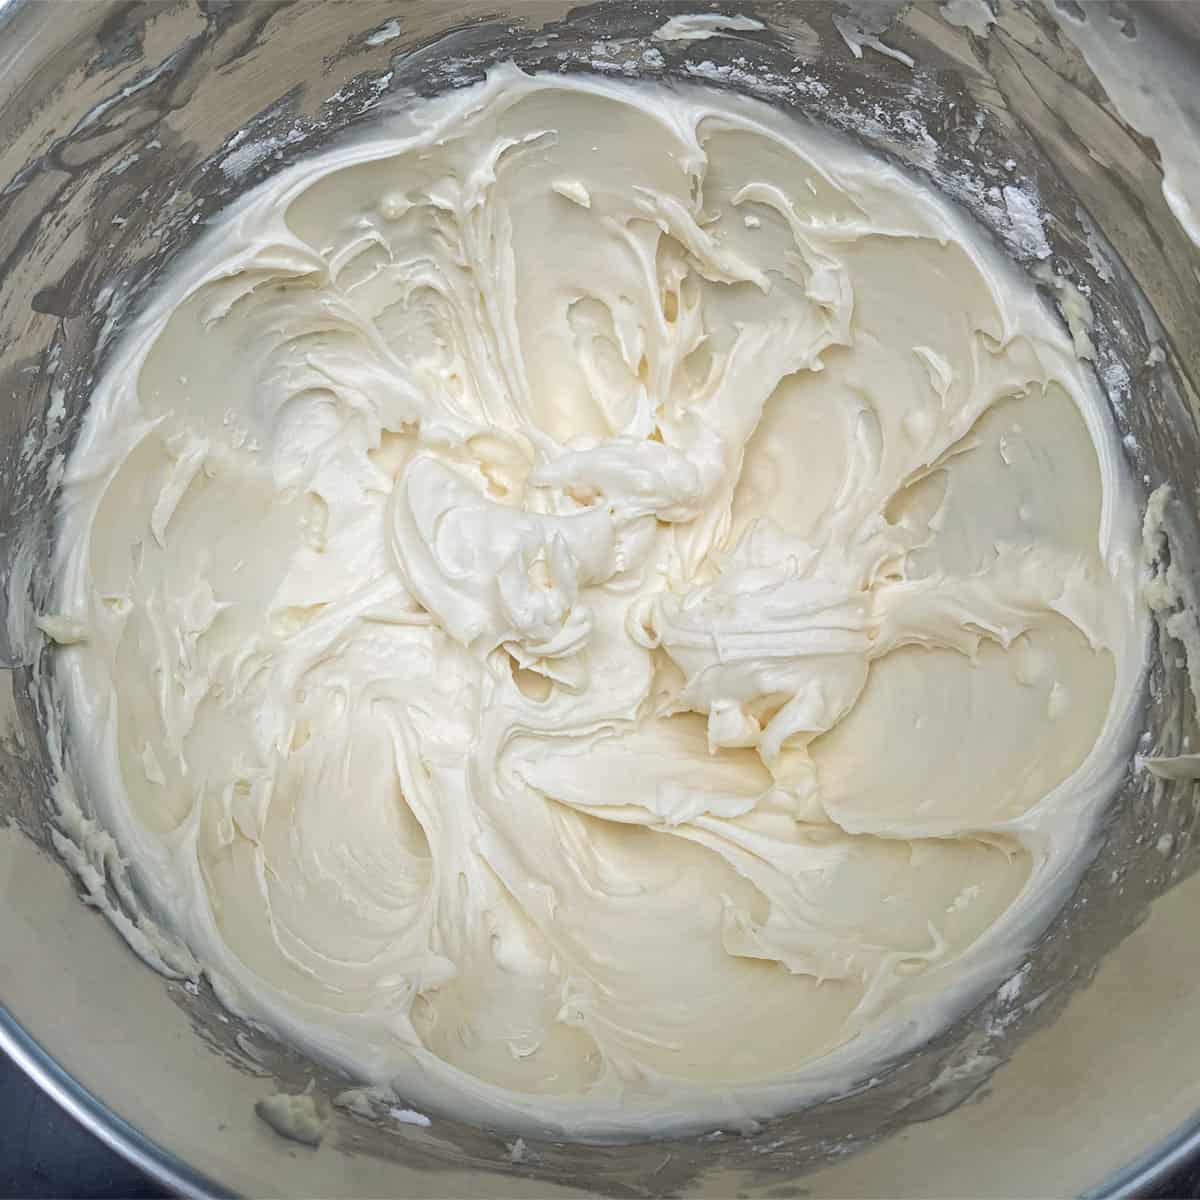 Smooth and creamy cream cheese icing after all ingredients were added and beaten for 3 minutes.